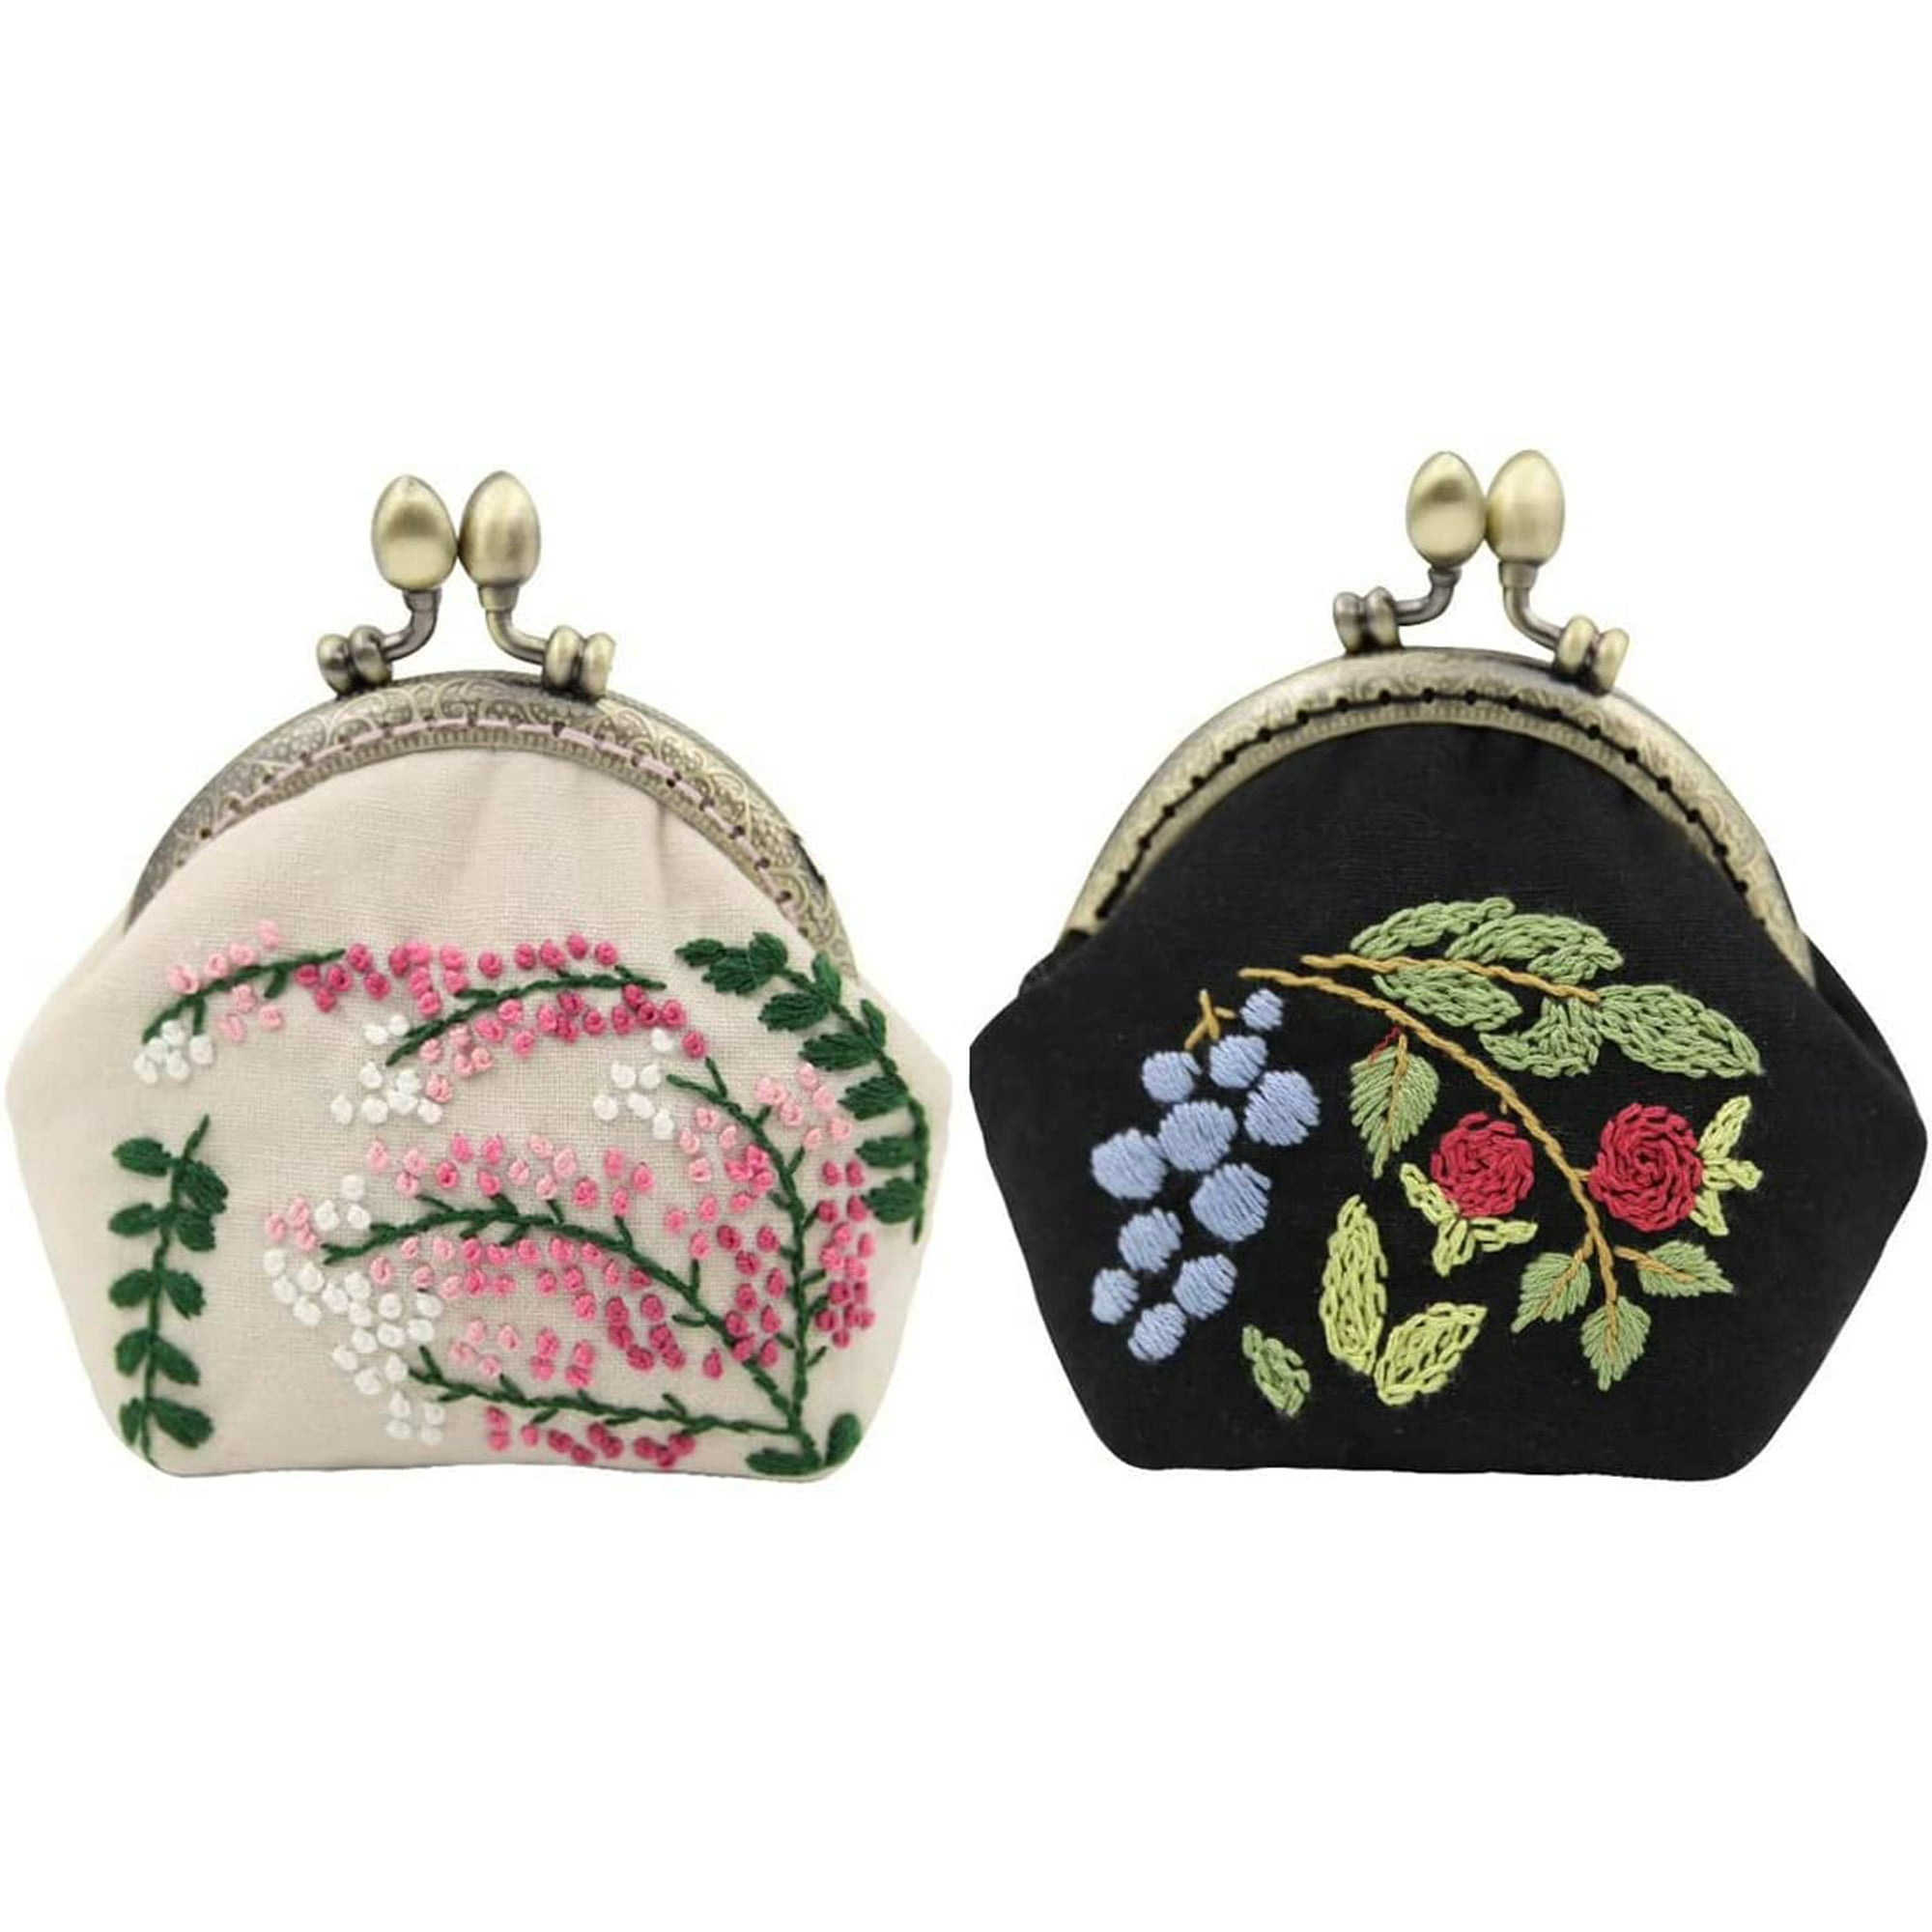 Wholesale DIY Kiss Lock Coin Purse Embroidery Kit 